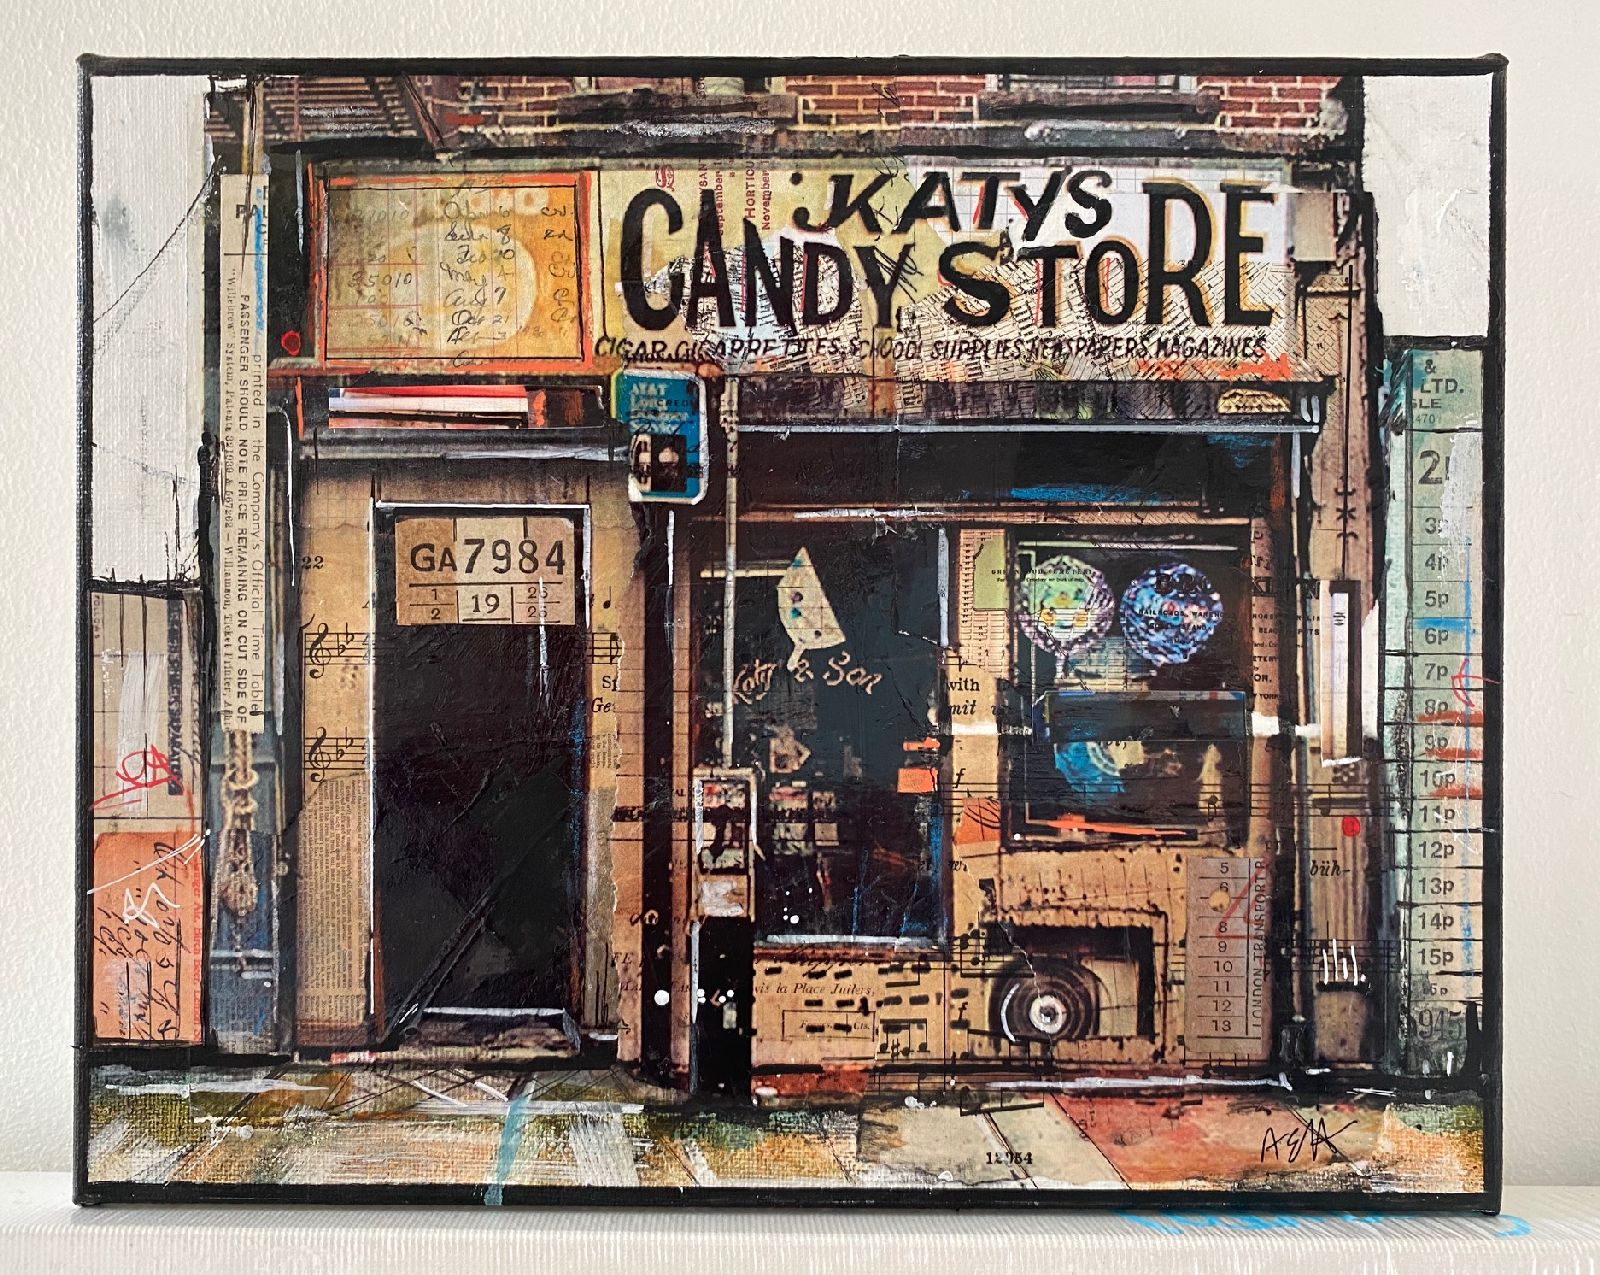 Katy's Candy Store by Anna  Allworthy